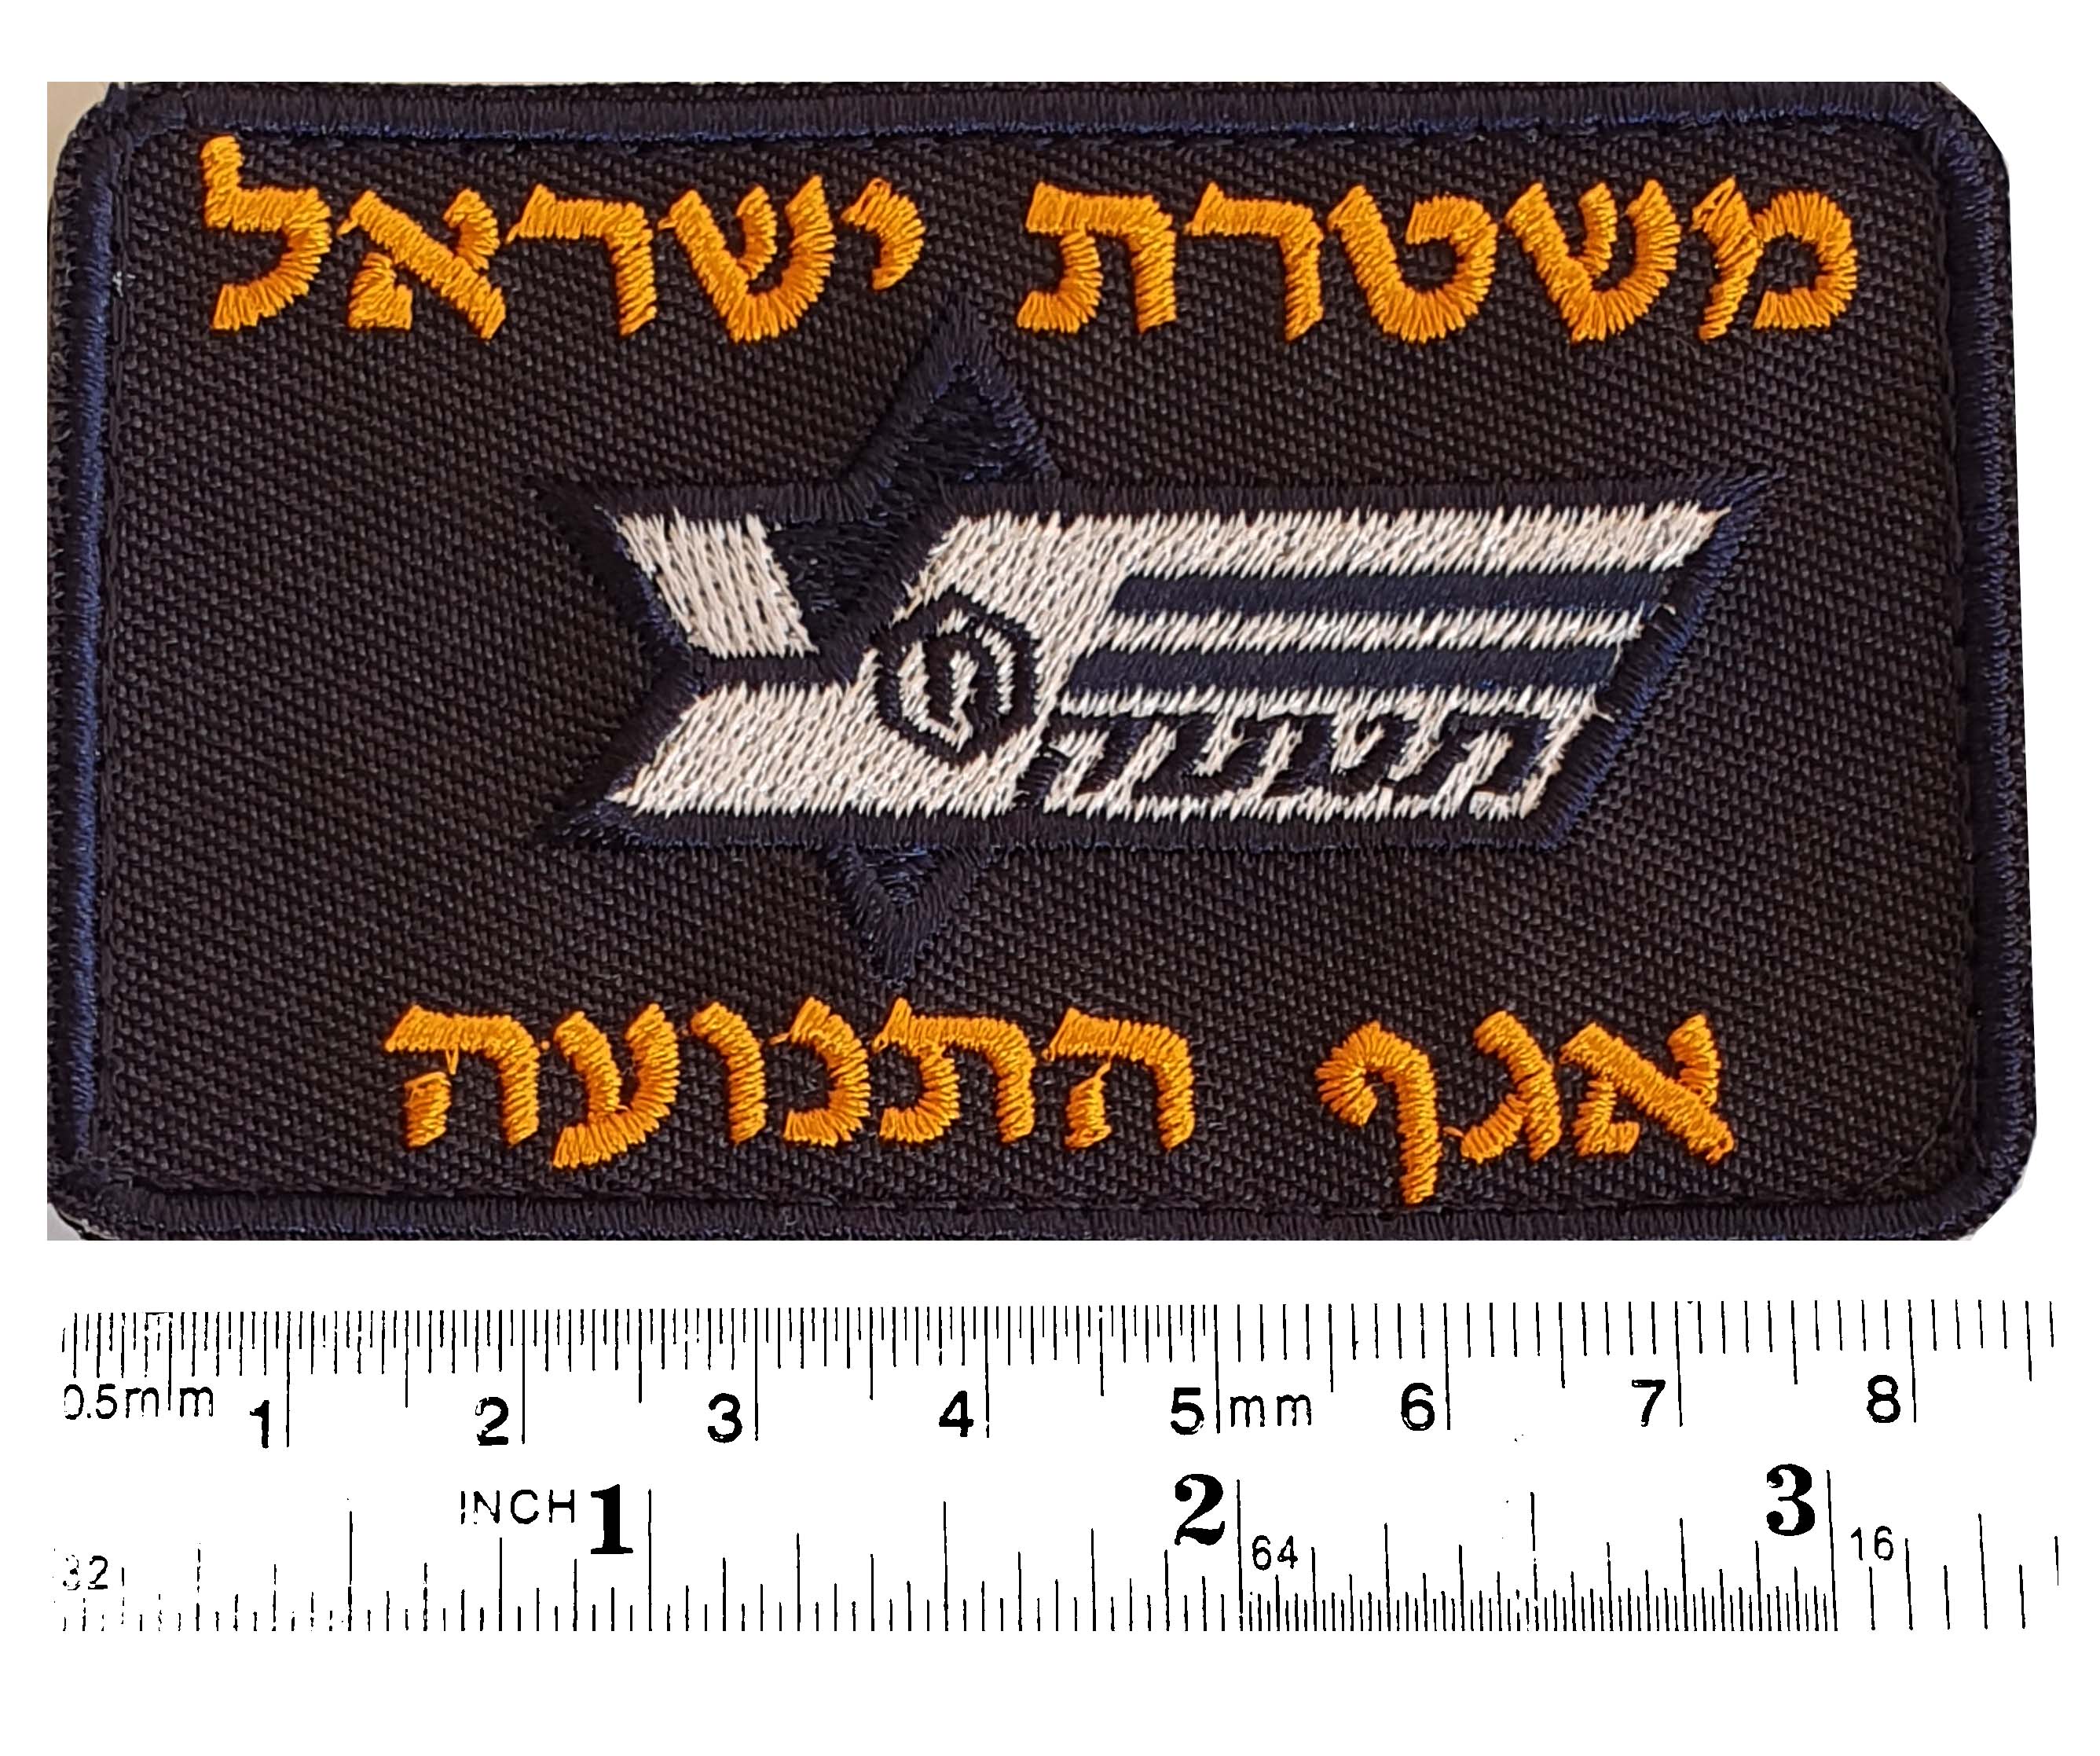 Israeli Traffic Police Division Department Supervise Security Uniform Chest Patch with Yellow letter embroidery.